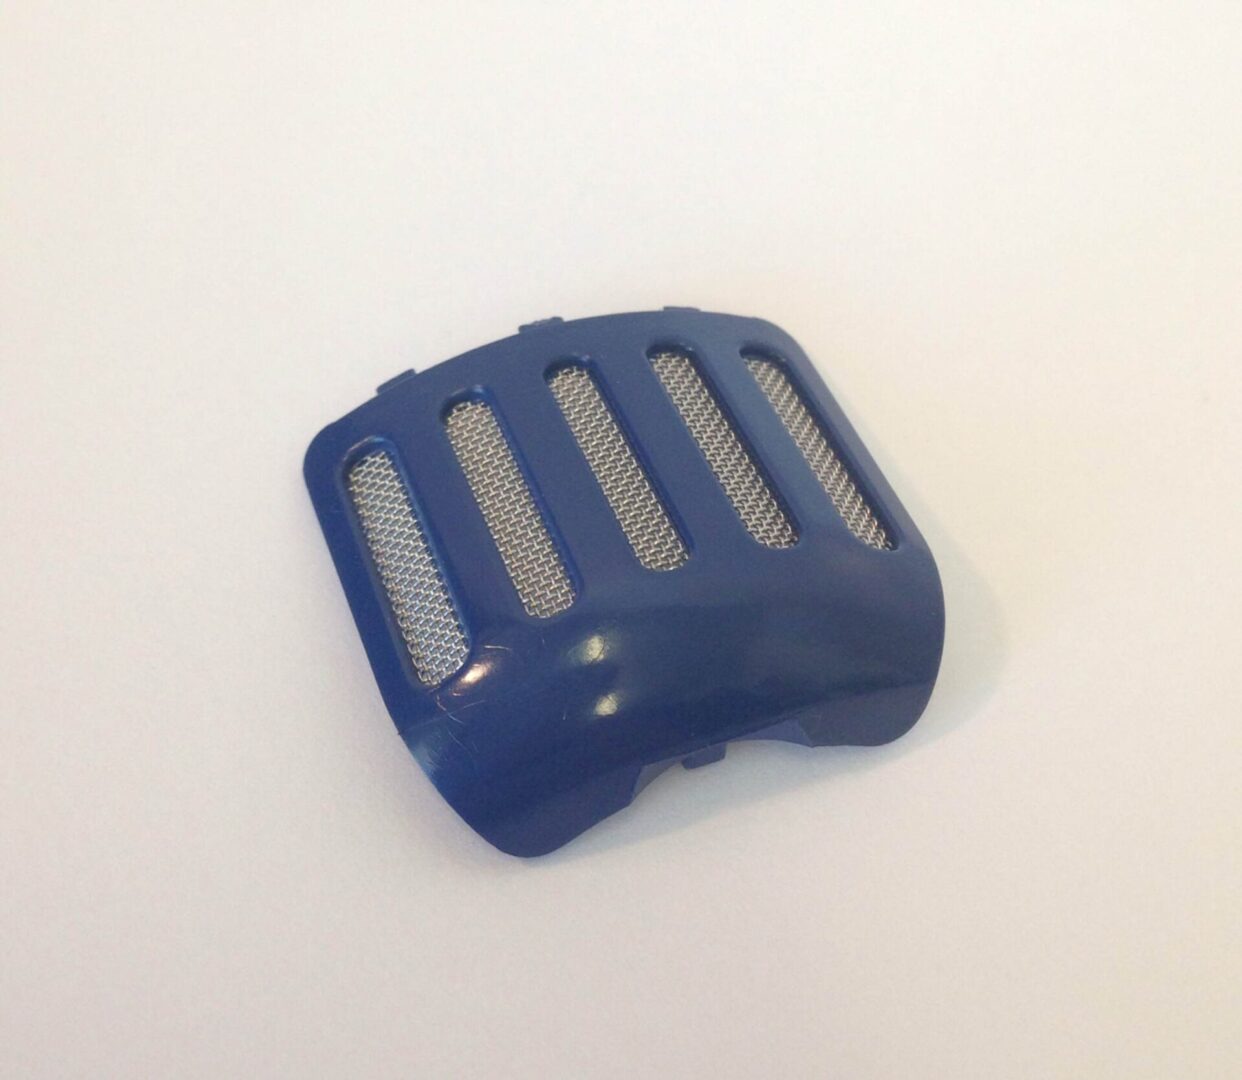 A blue plastic object sitting on top of a table.